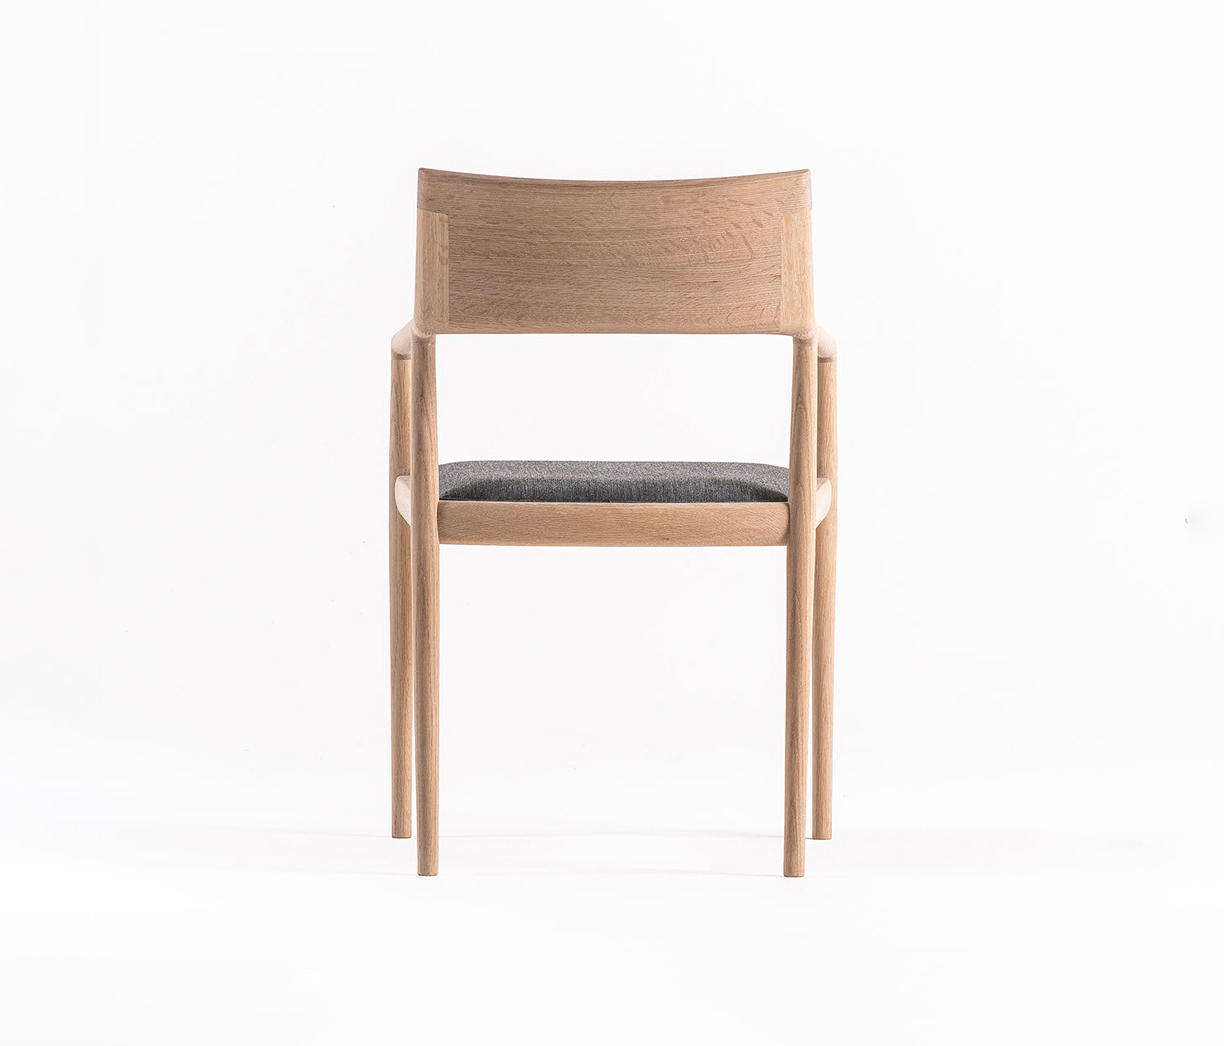 CATS CHAIR - Chairs from Time & Style | Architonic